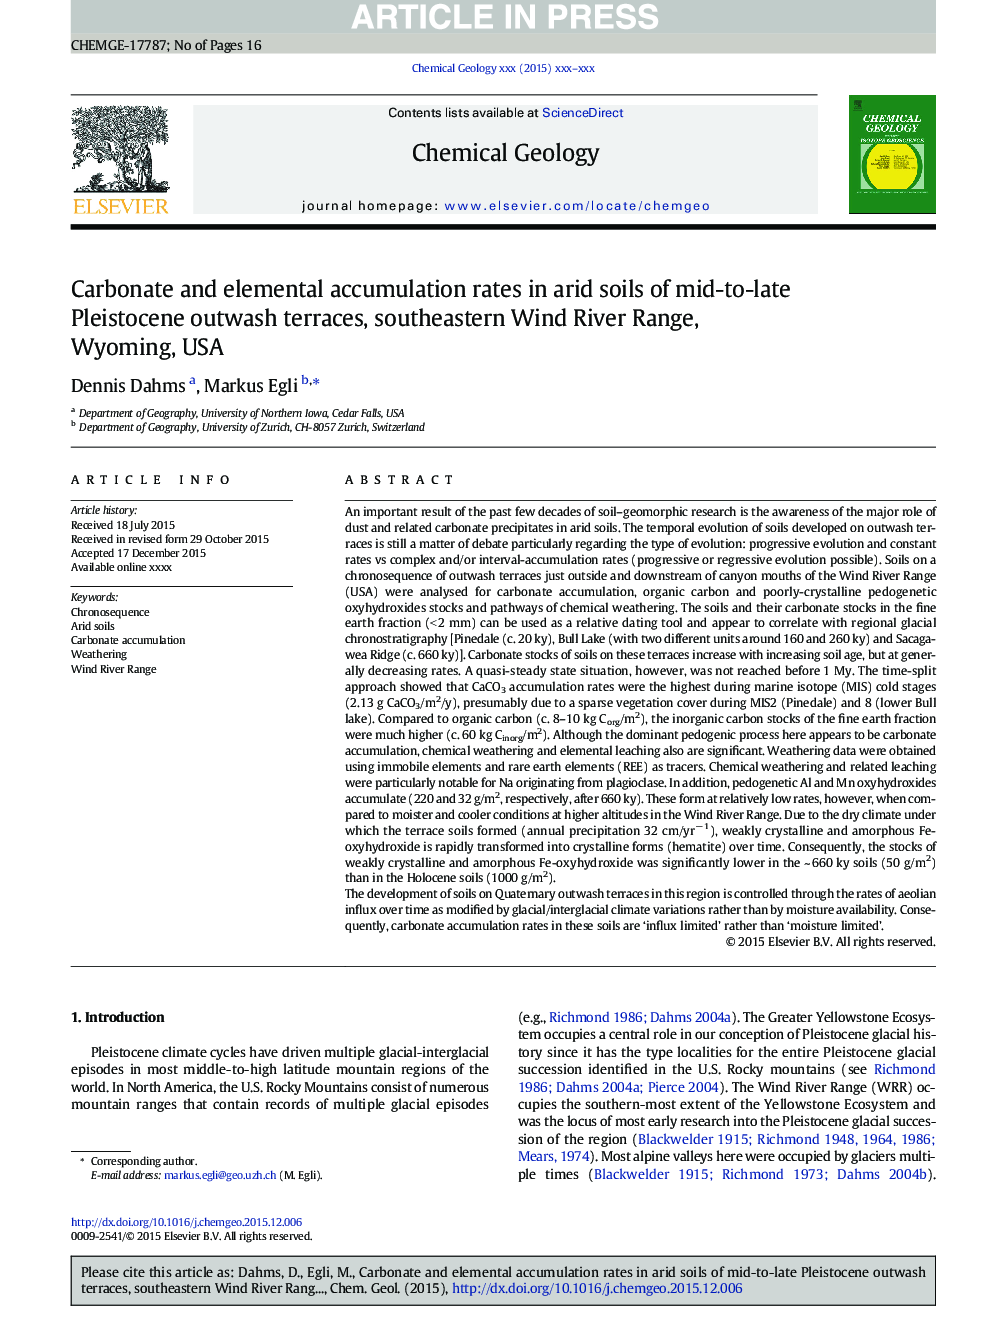 Carbonate and elemental accumulation rates in arid soils of mid-to-late Pleistocene outwash terraces, southeastern Wind River Range, Wyoming, USA